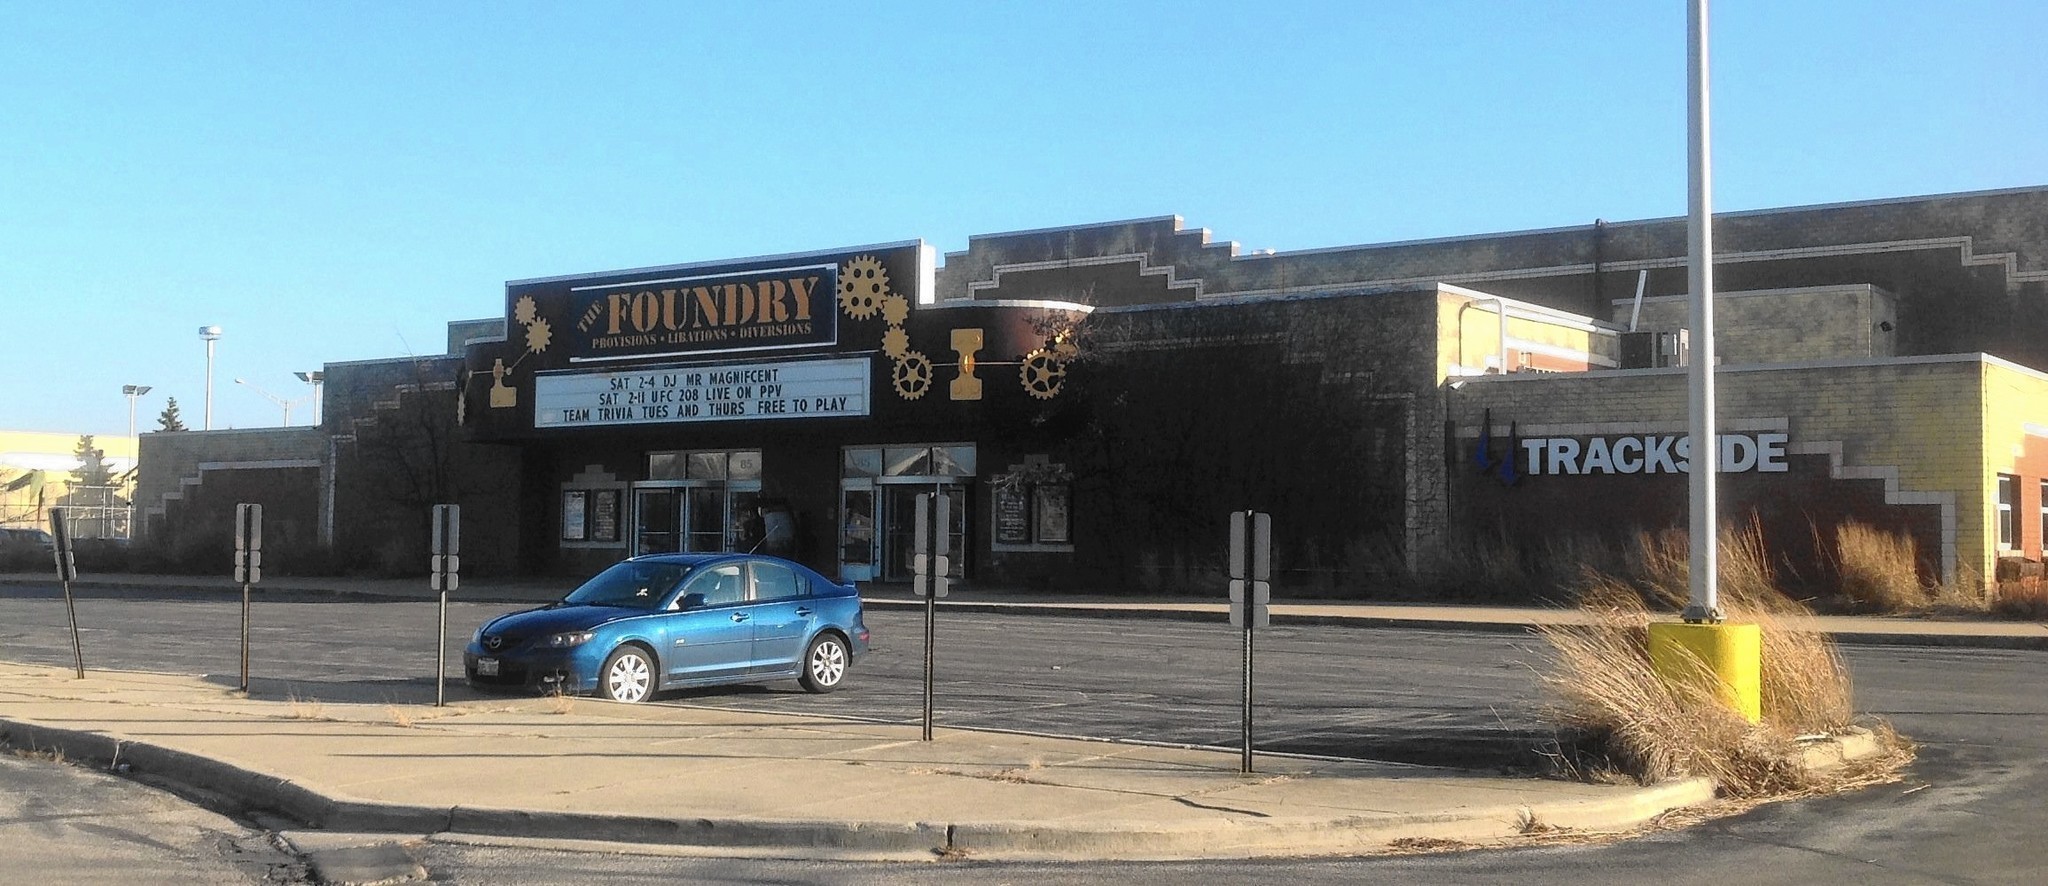 The Foundry in Aurora sold, to become new entertainment venue - Chicago Tribune